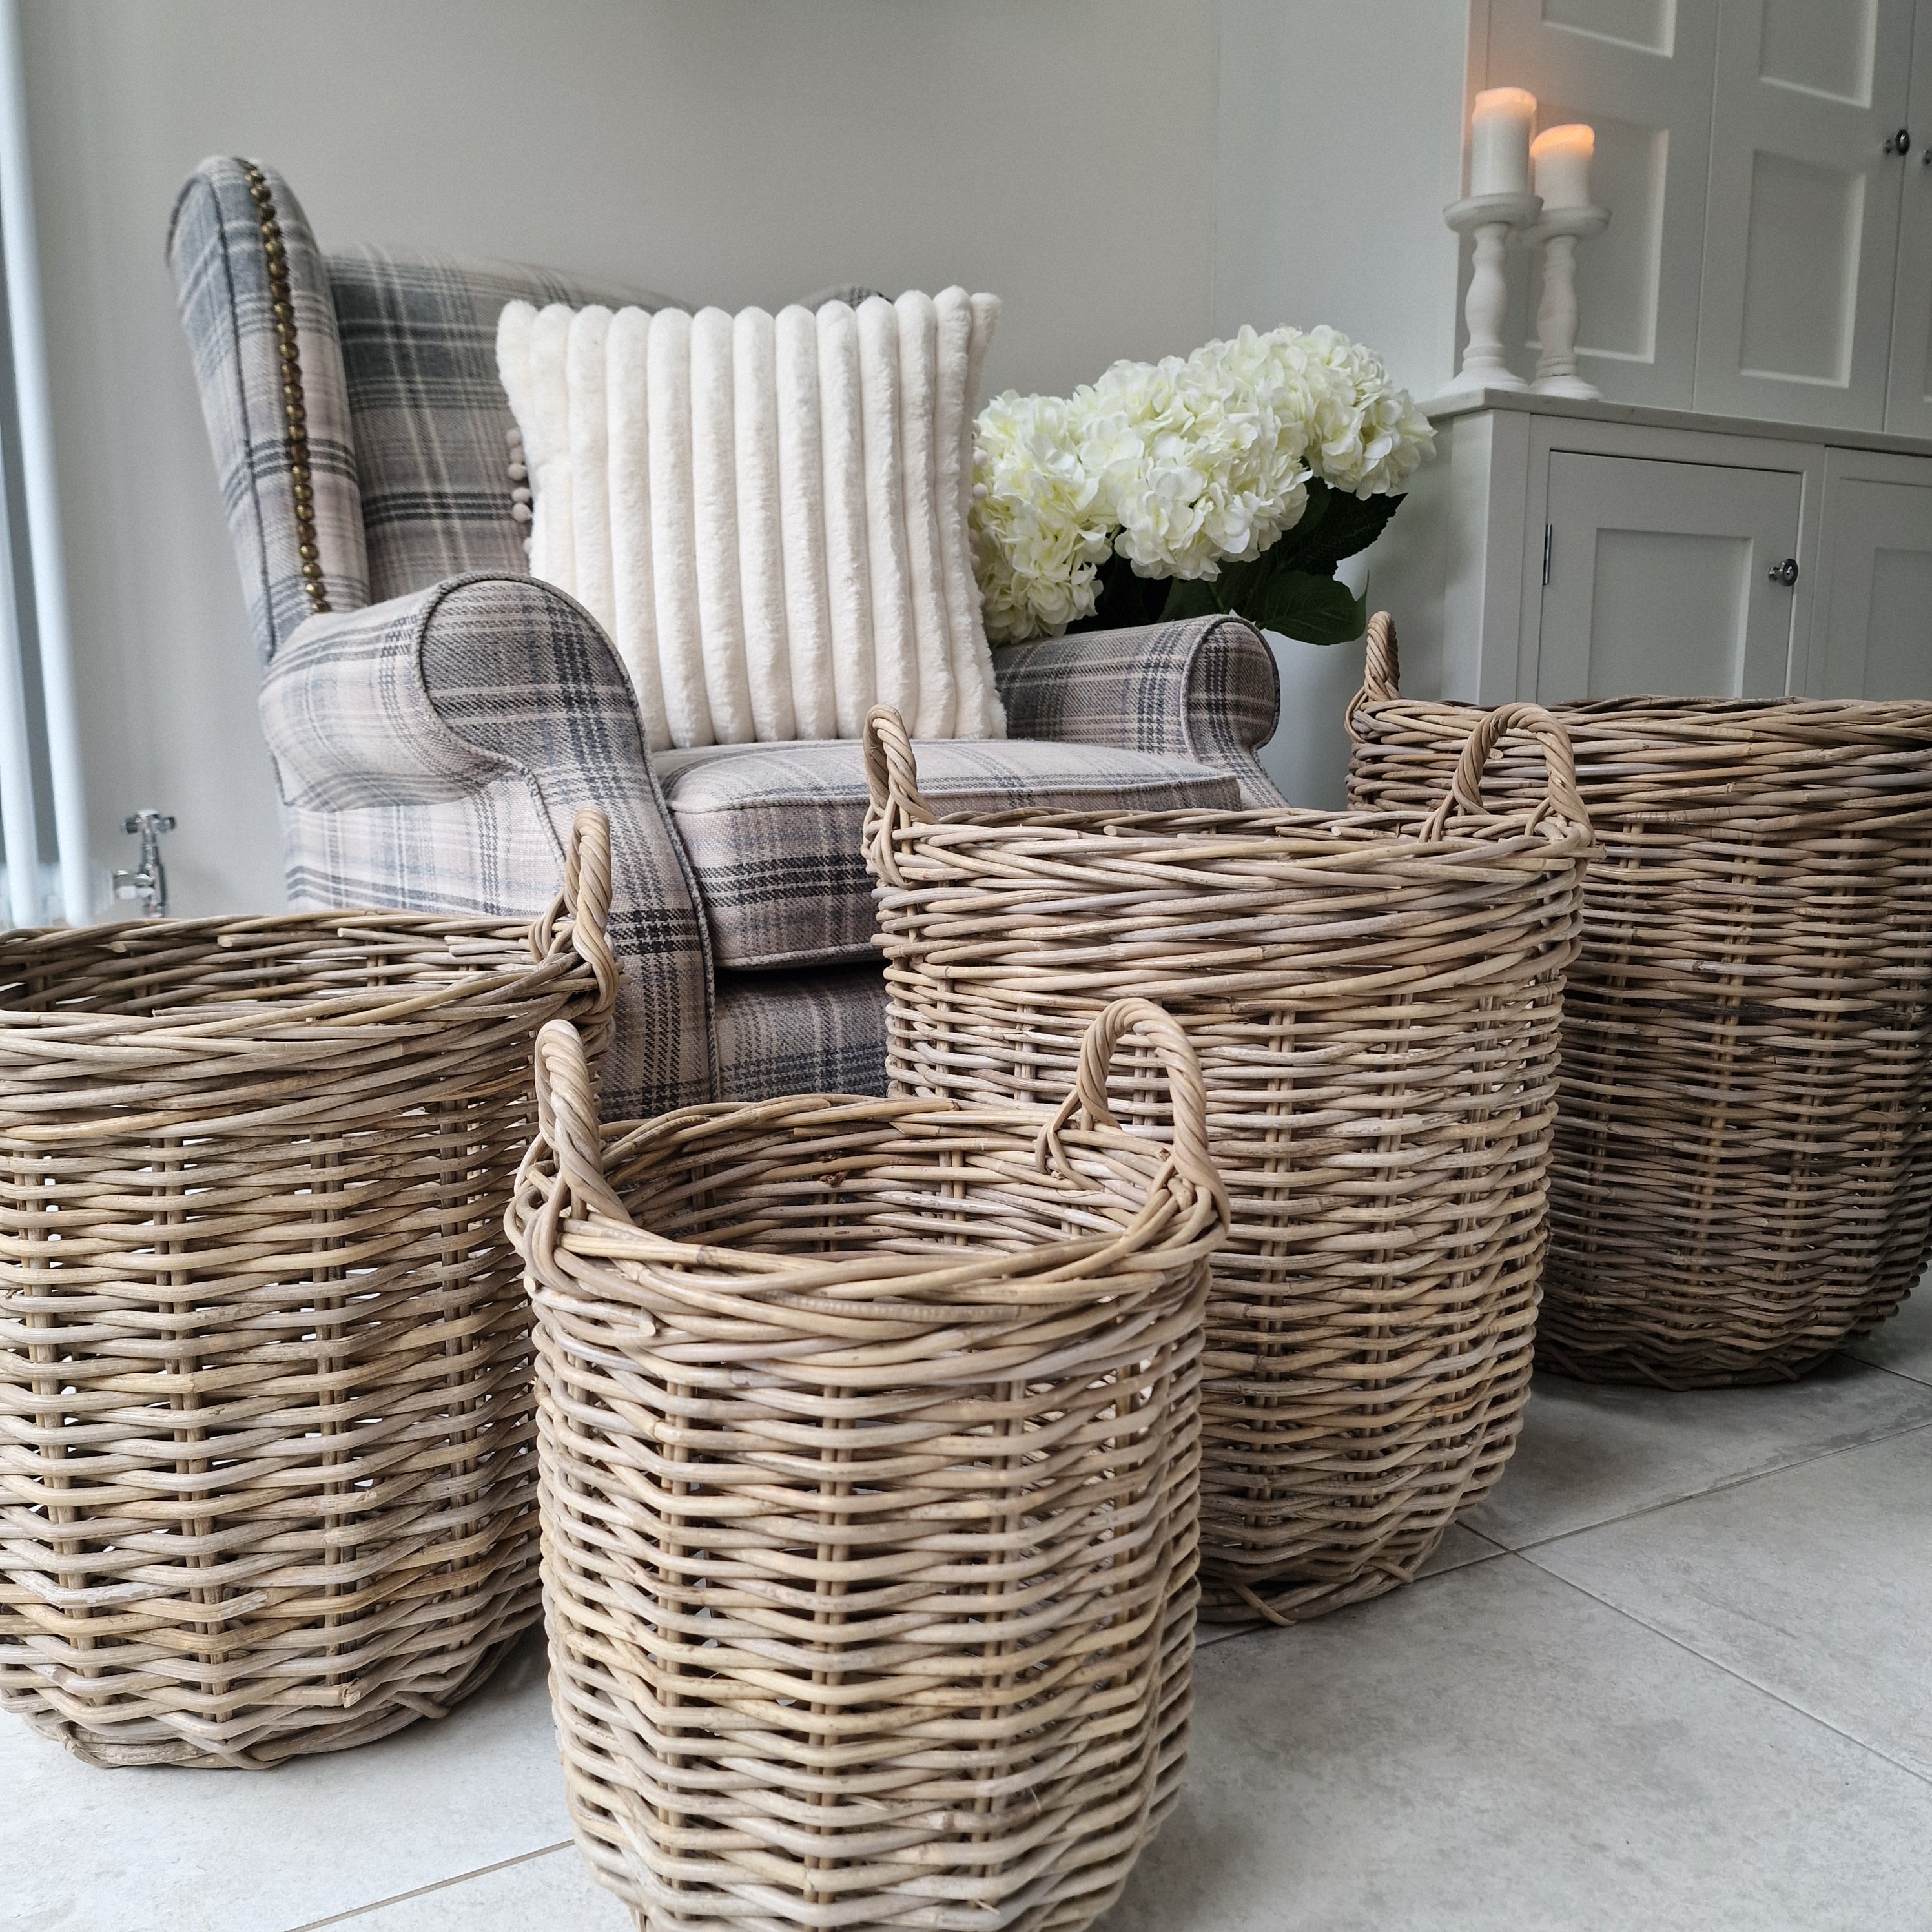 Extra Large Round Rattan Willow Basket – Dot and Blush